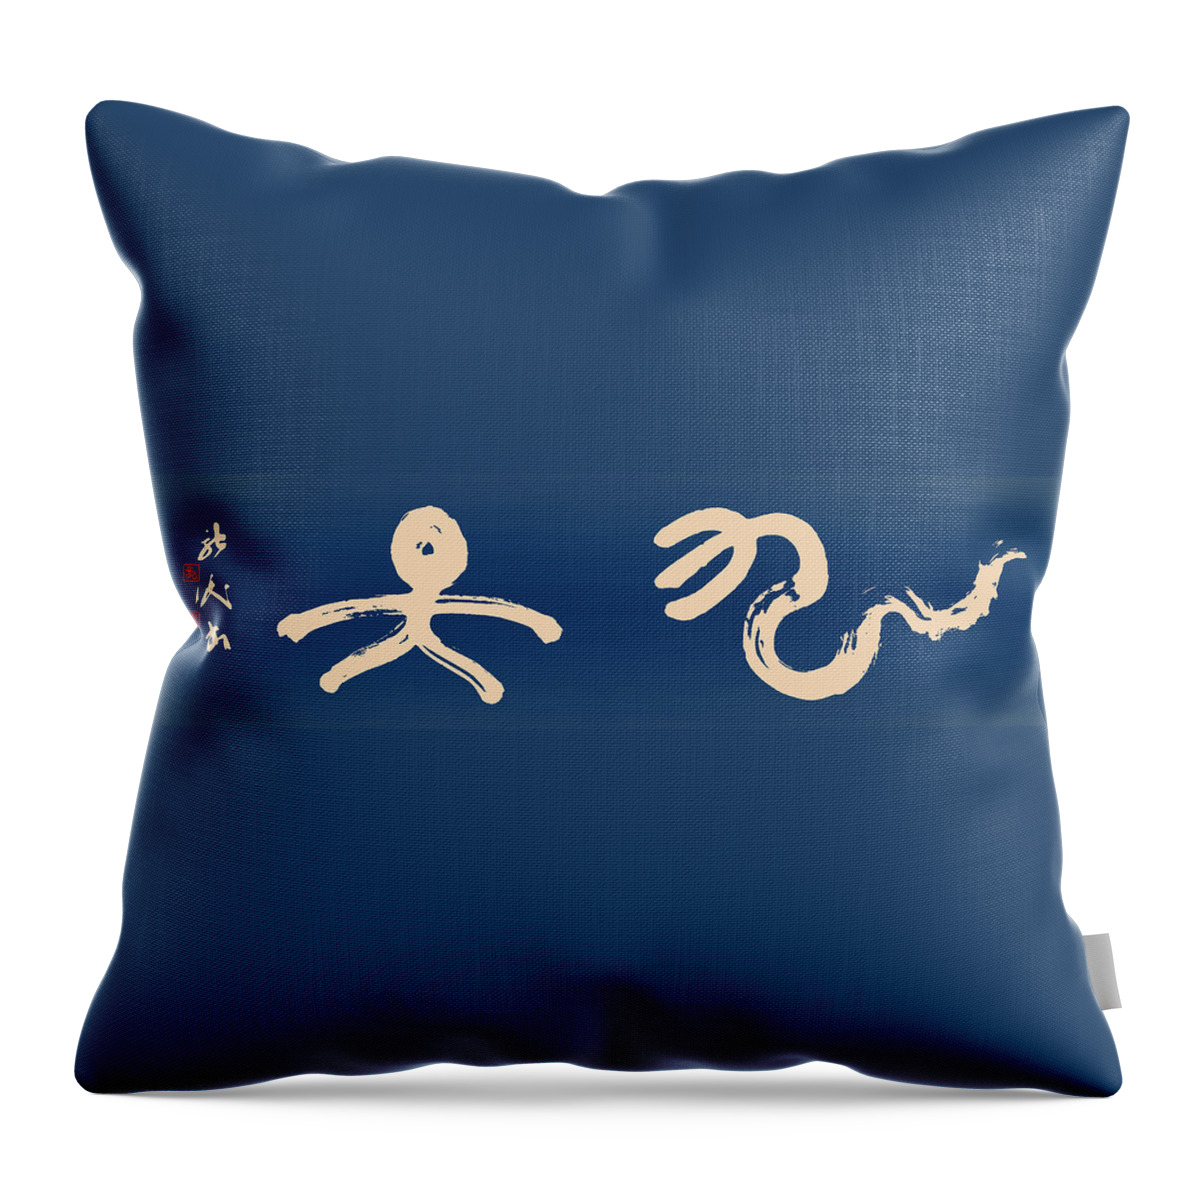 Heavens Throw Pillow featuring the painting Heavens by Ponte Ryuurui